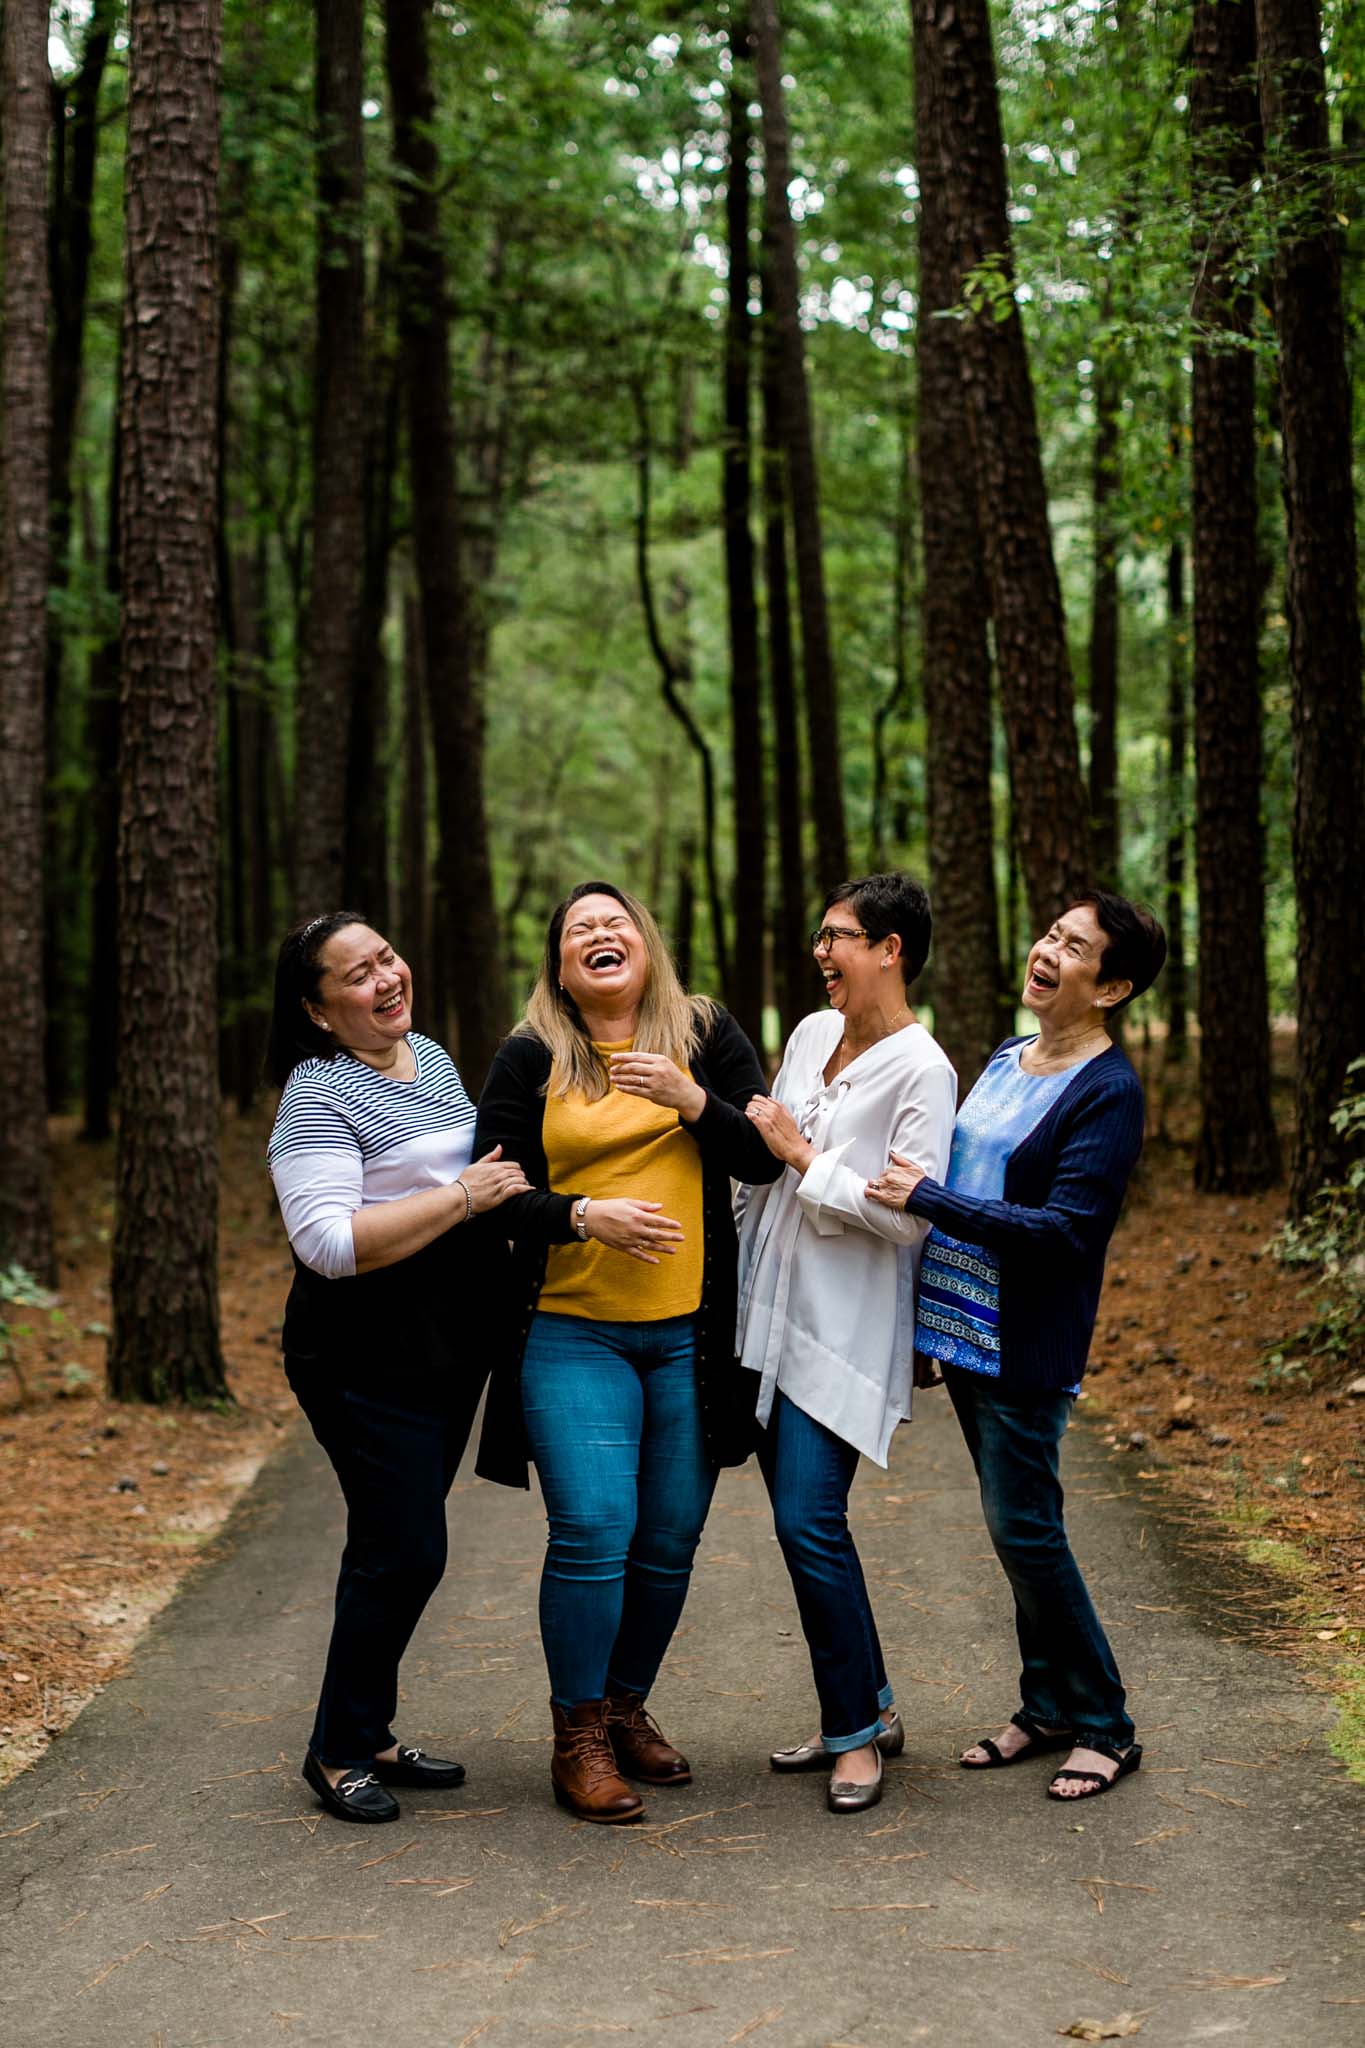 Raleigh Newborn Photographer | By G. Lin Photography | Umstead Park | Outdoor portrait of four women smiling at camera